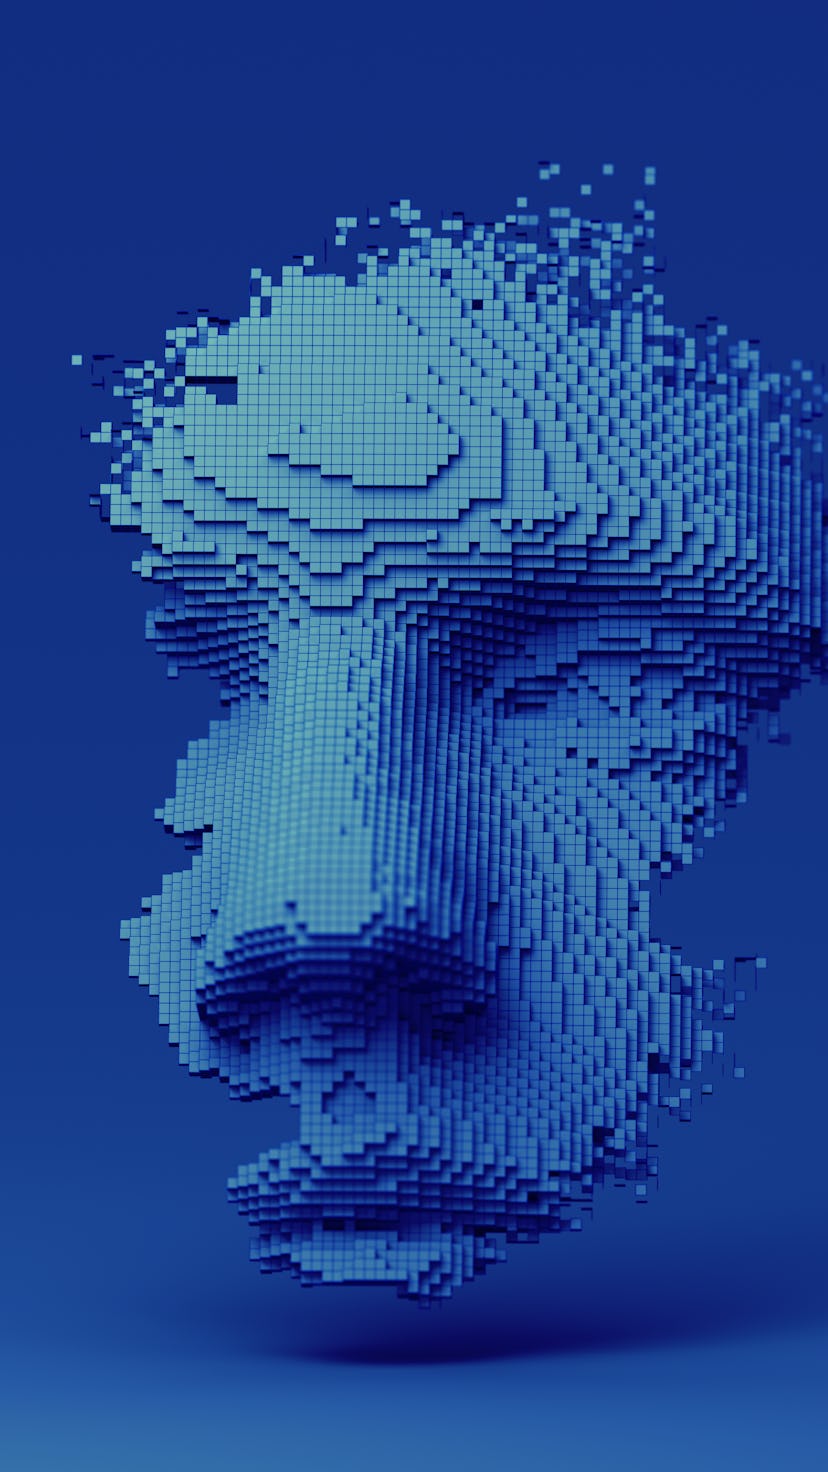 Abstract human face, 3d illustration, head constructed of cubes, artificial intelligence concept